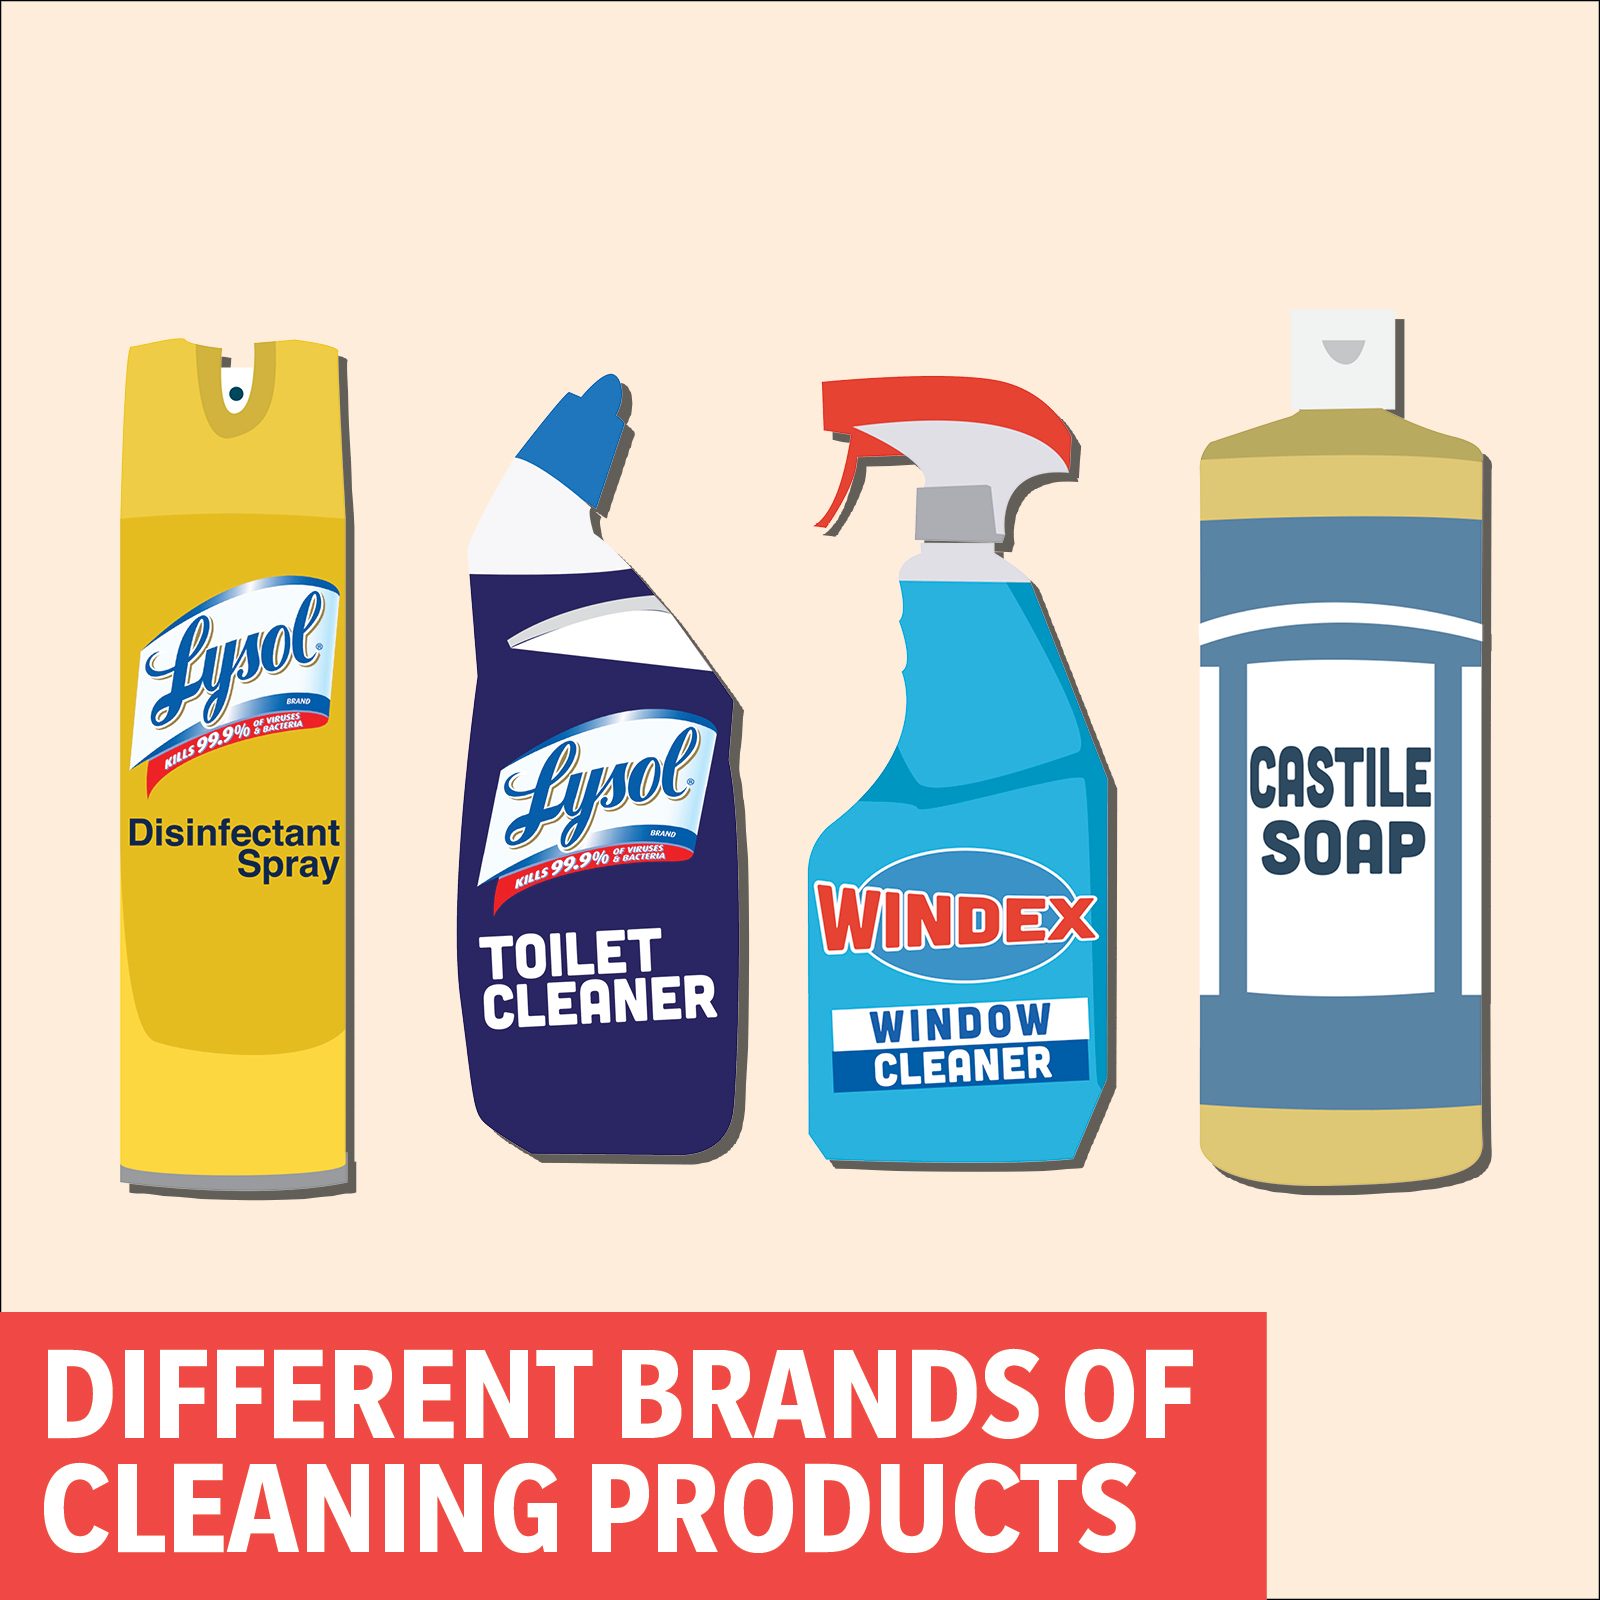 https://www.tasteofhome.com/wp-content/uploads/2018/12/Different-Brands-of-Cleaning-Products-2.jpg?fit=700%2C700